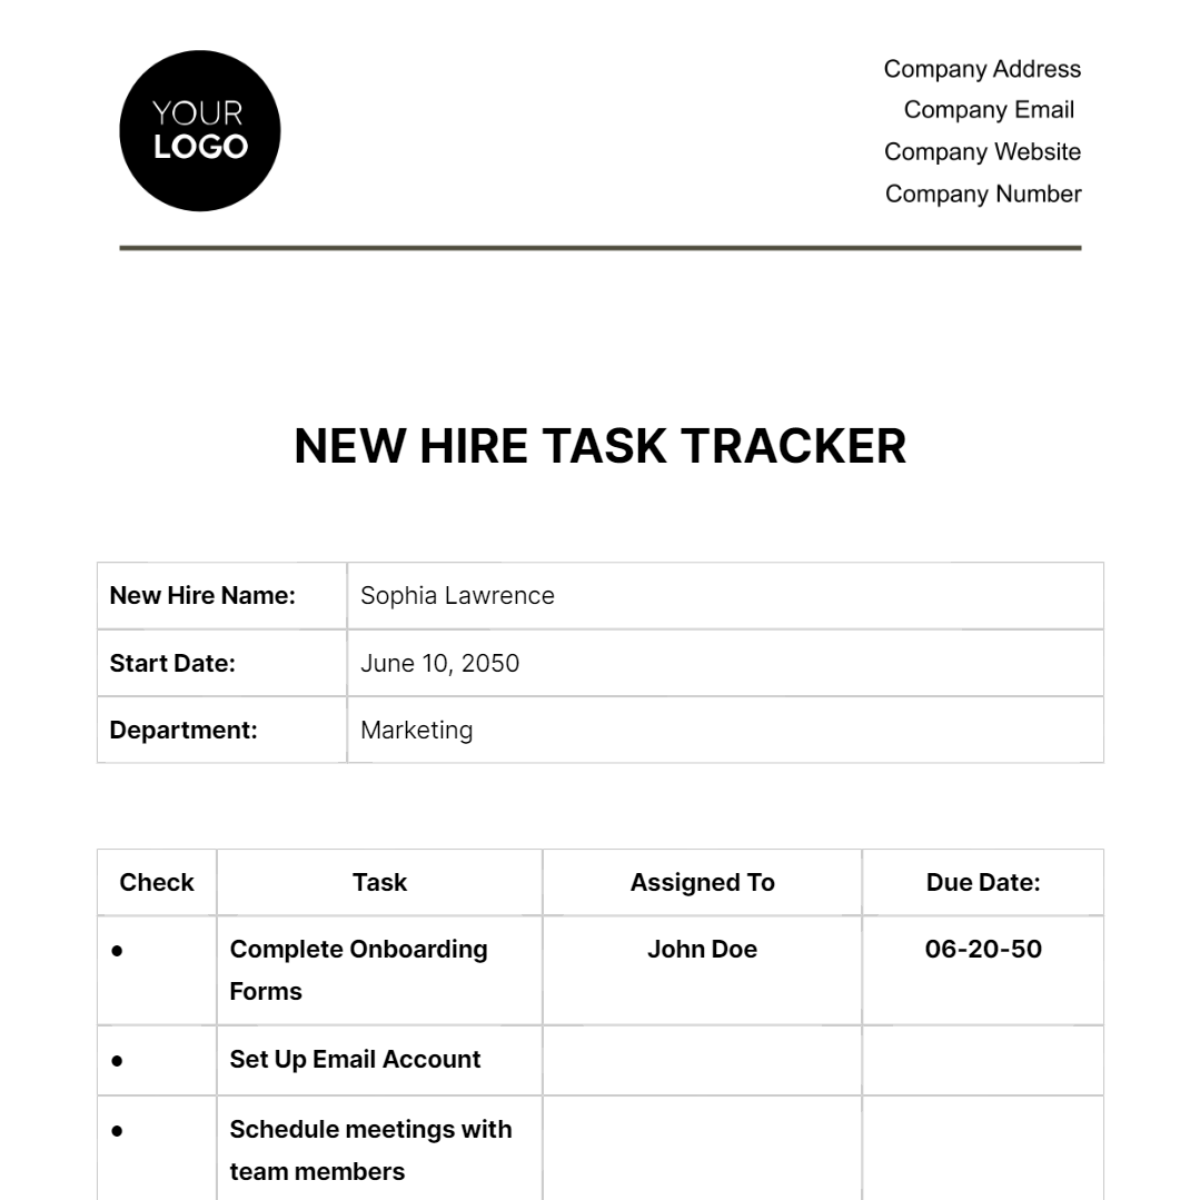 Free New Hire Task Tracker HR Template